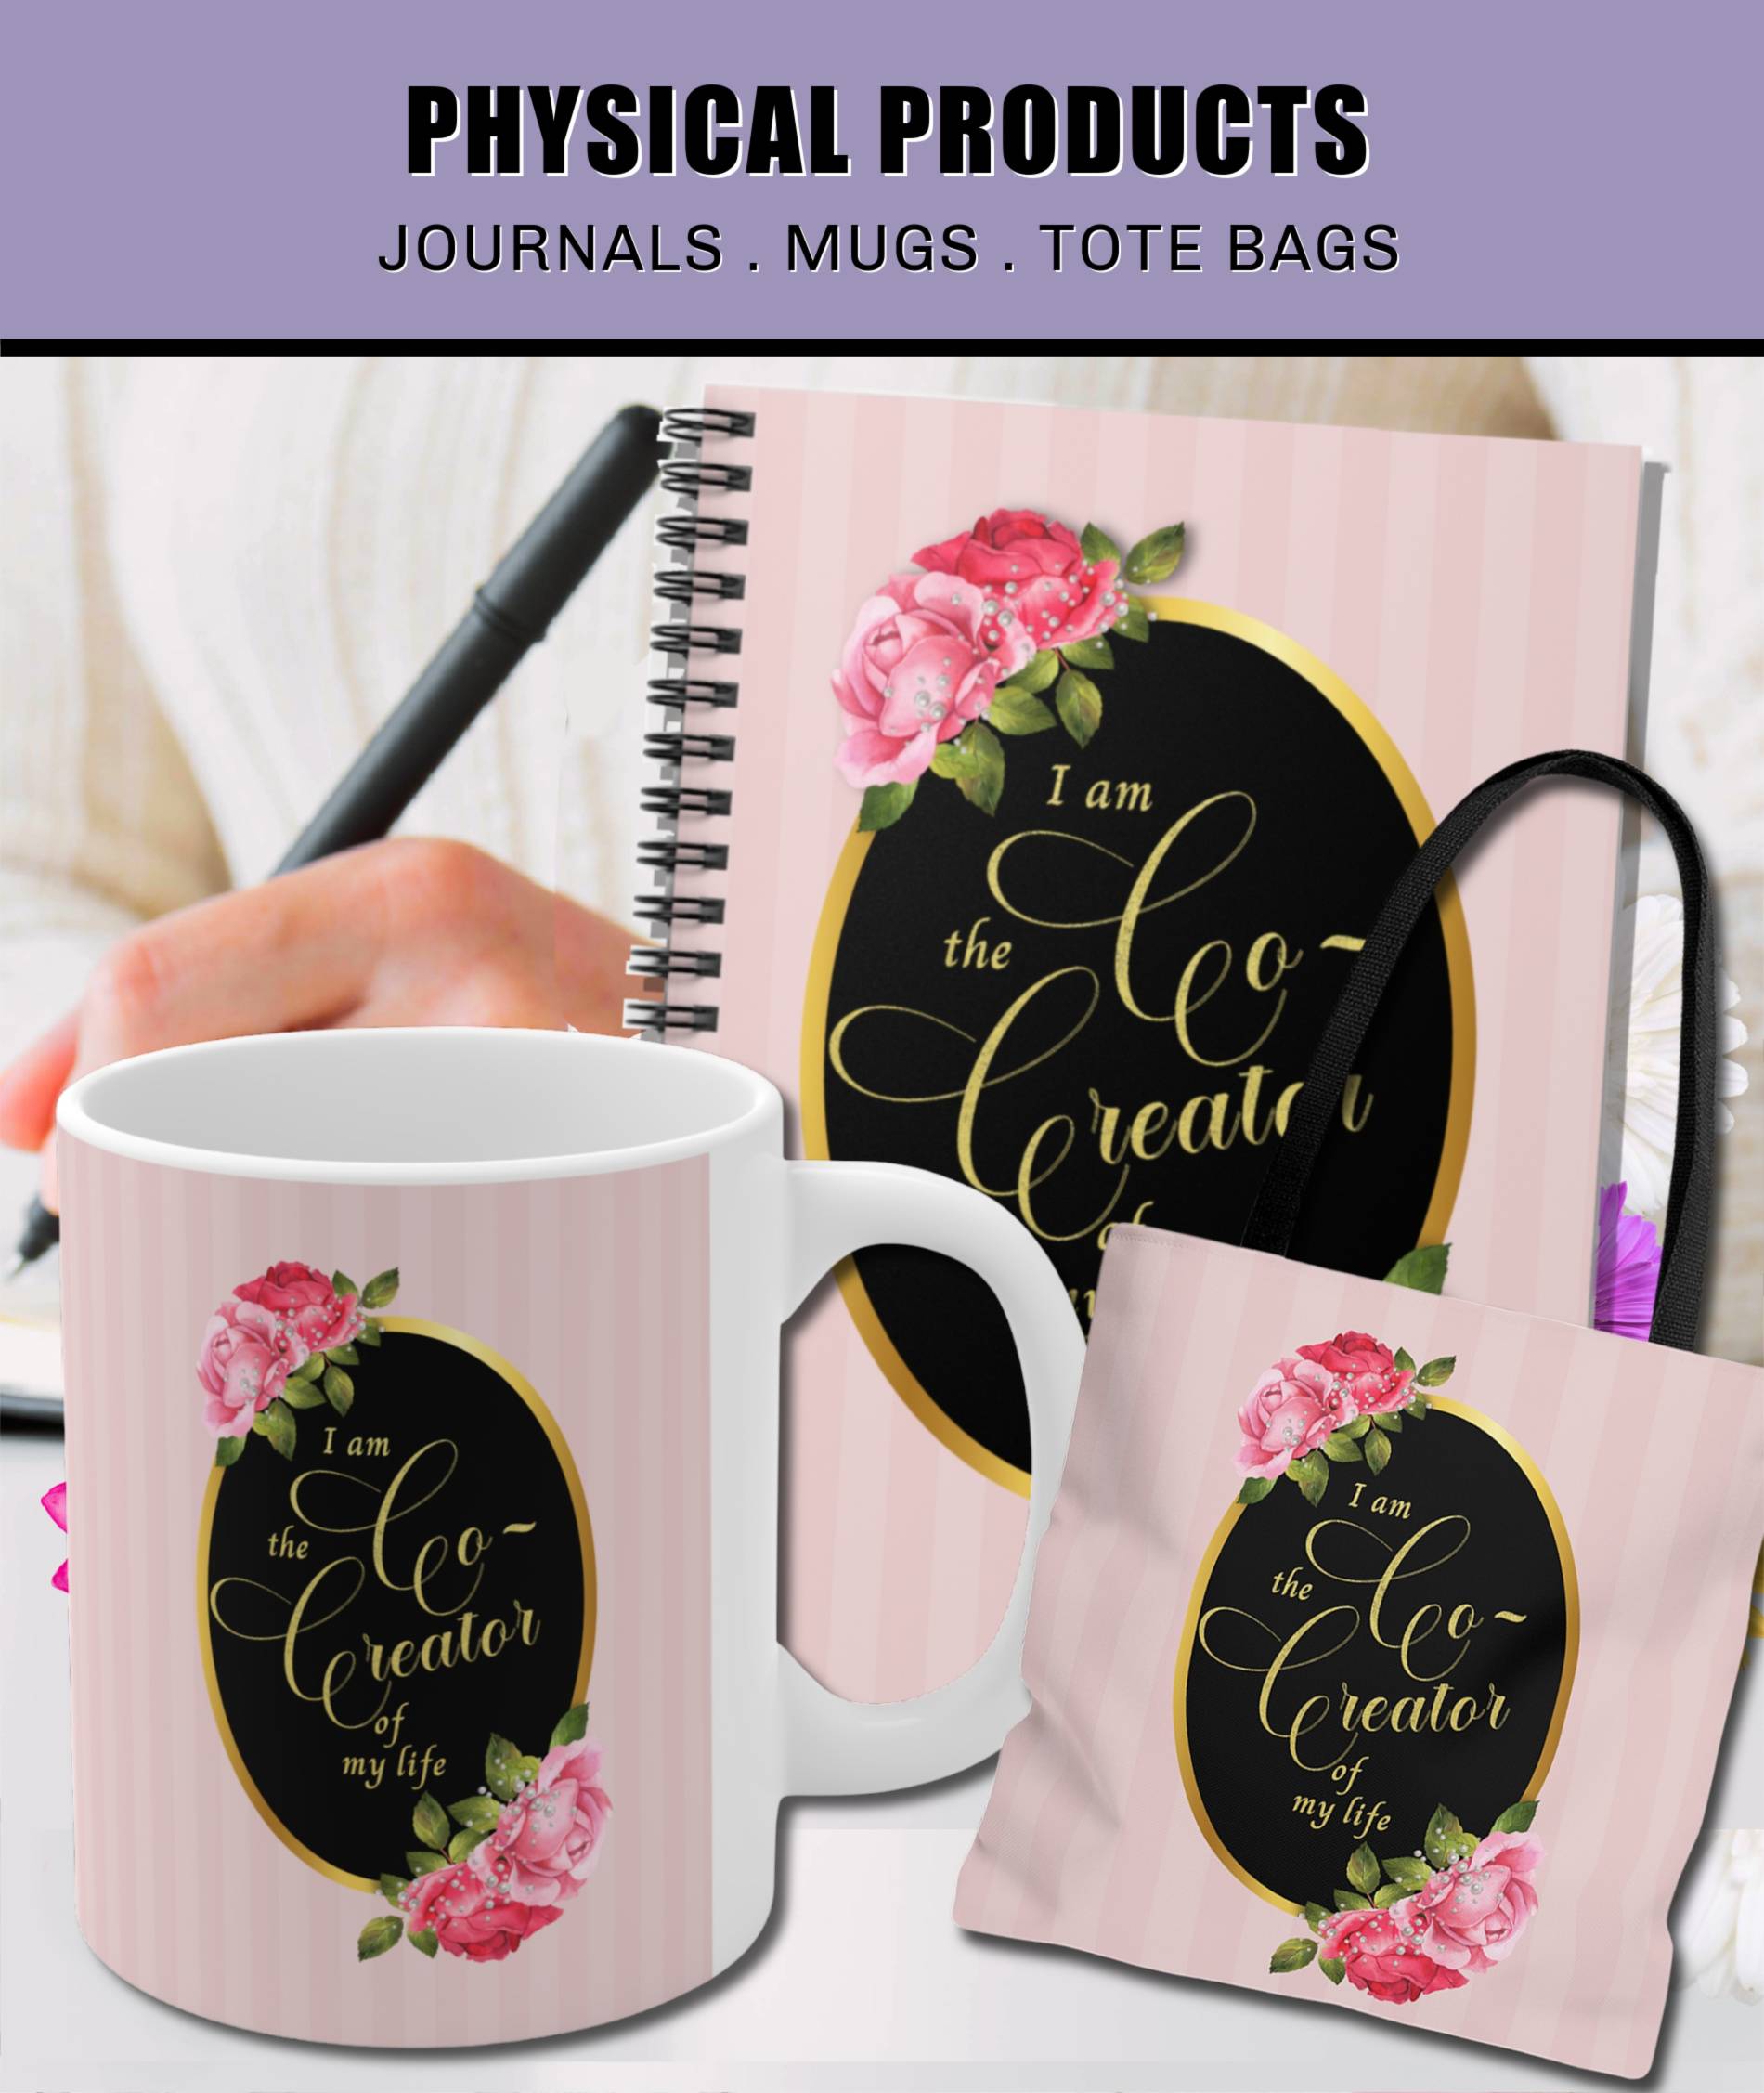 physical products. journals, mugs, tote bags